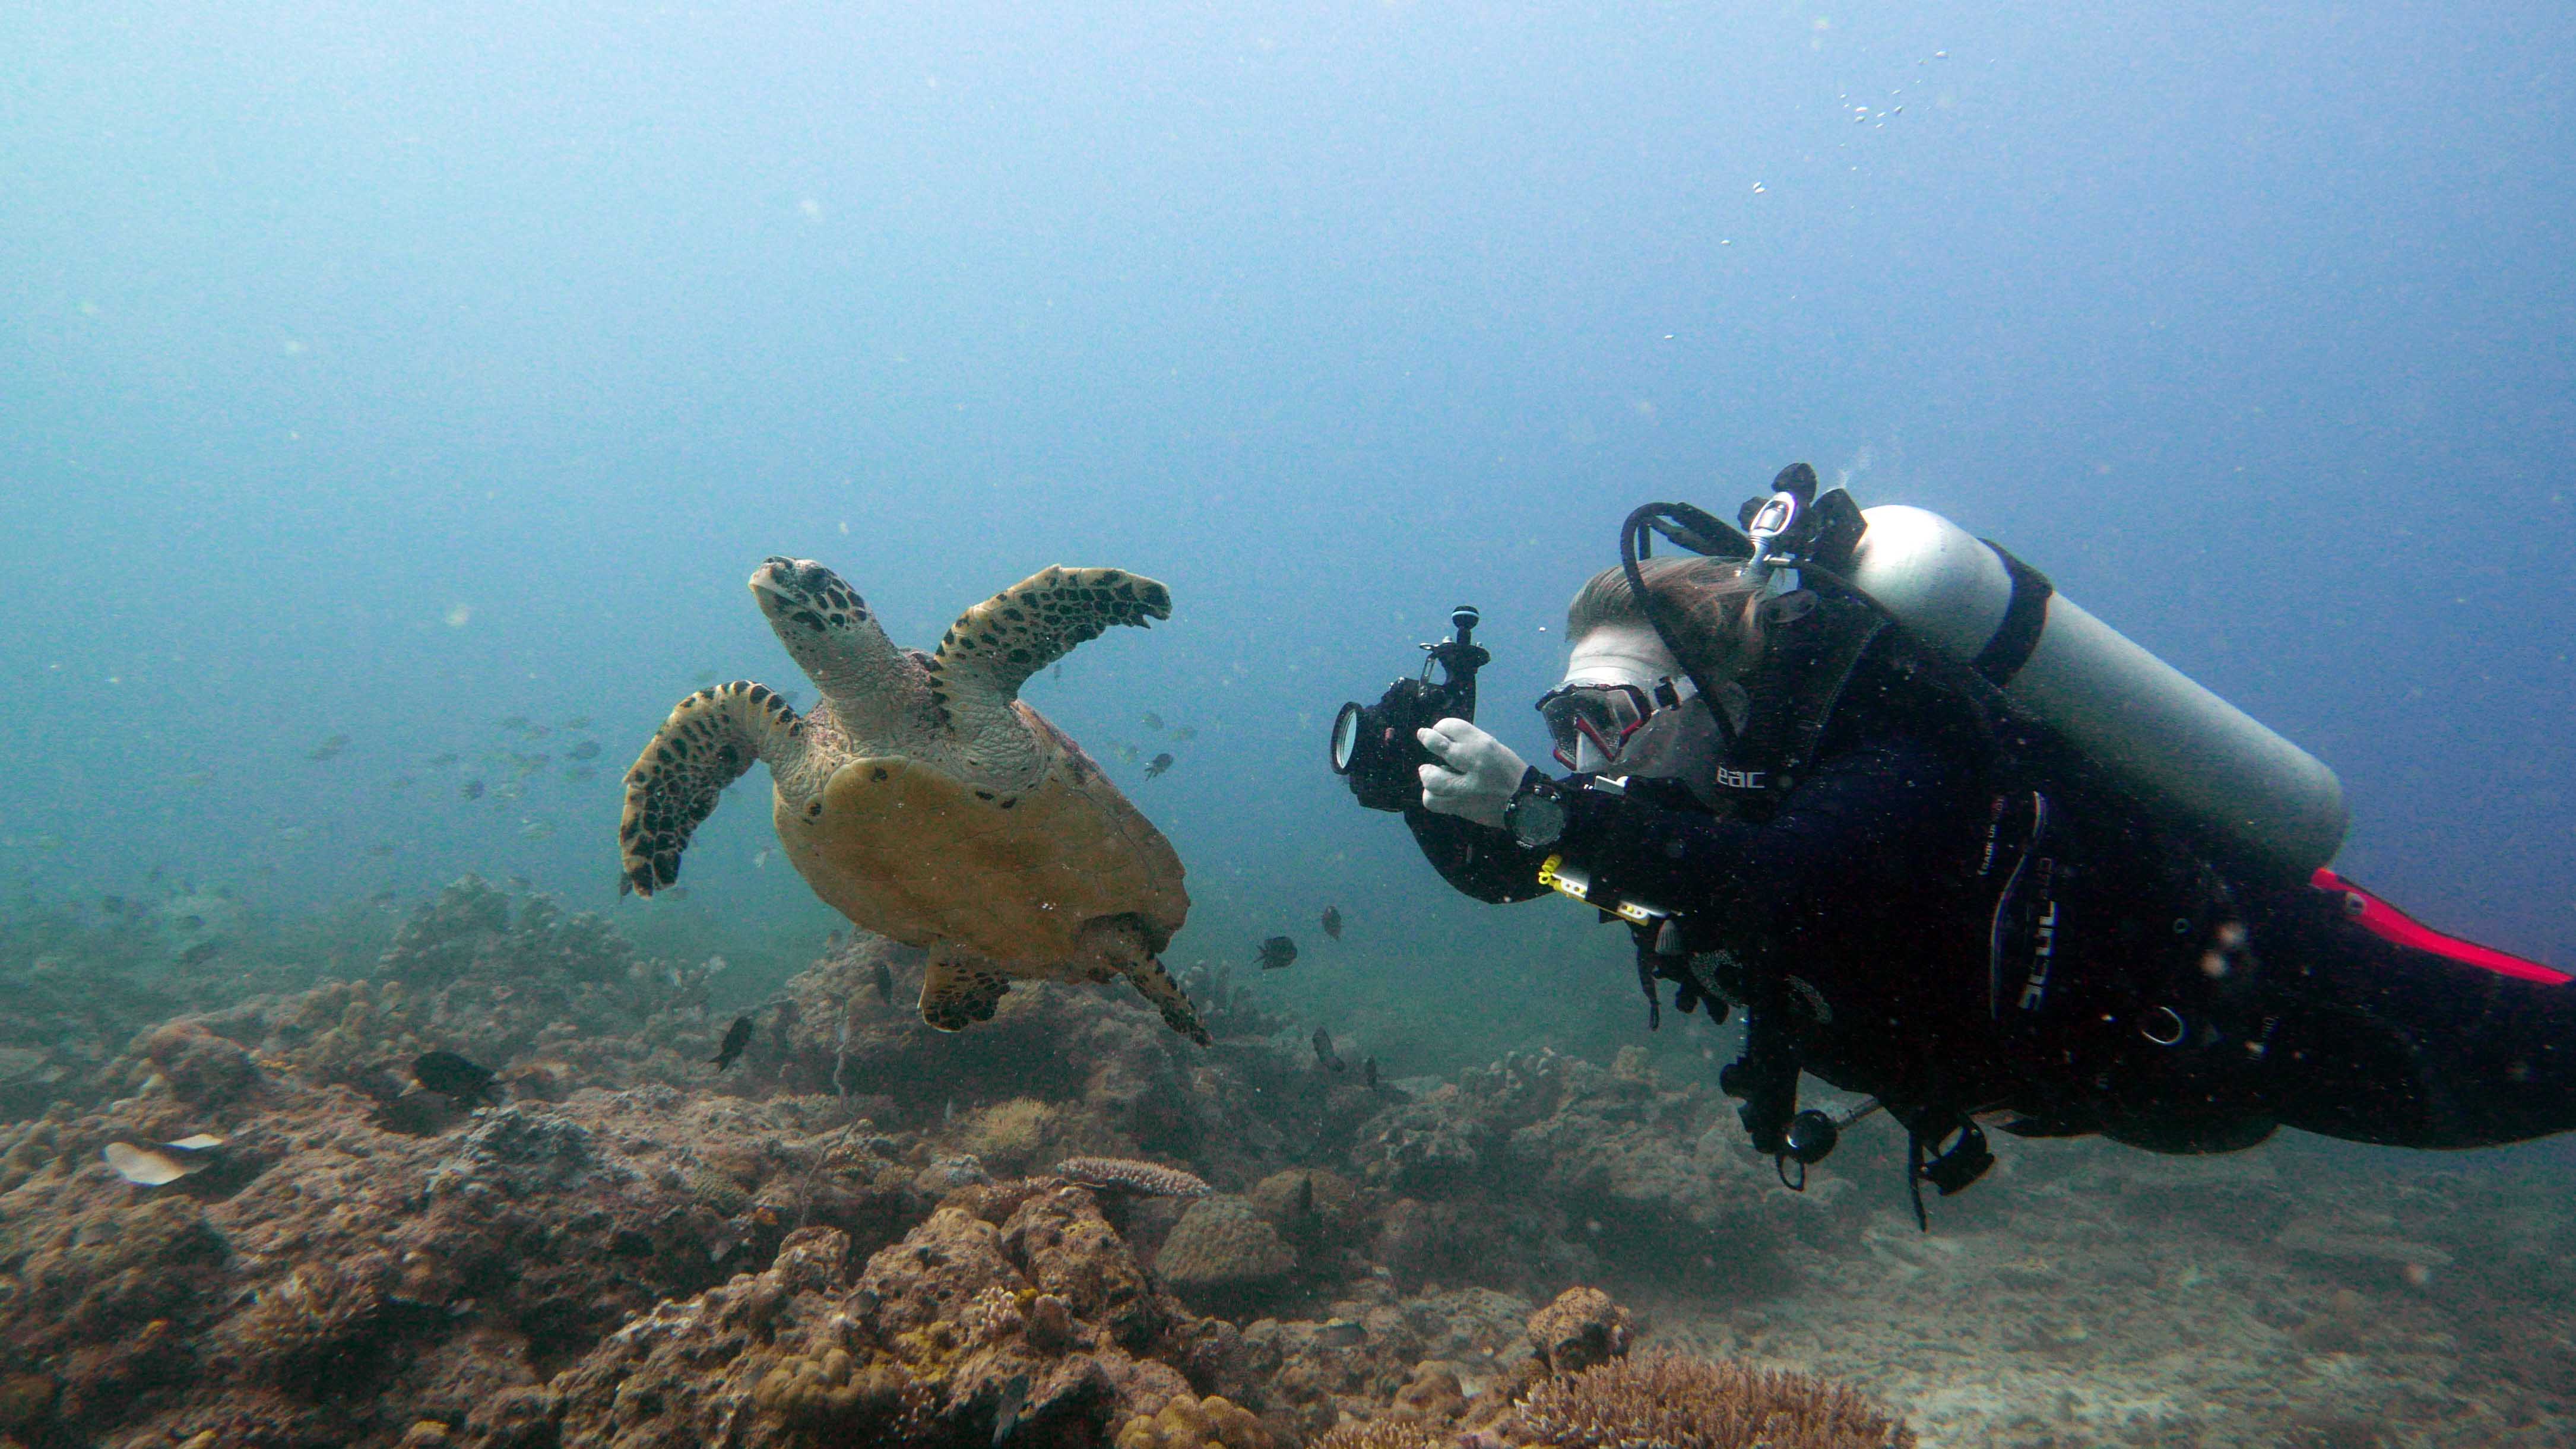 Turtle Underwater Videography Course Underwater Photography Underwater Videography Underwater Photographer Underwater Videographer Underwater Photo Underwater Production Passion Sea Ocean Water El Nido Palawan Philippines Marine Life Corals Reefs Scuba Diving